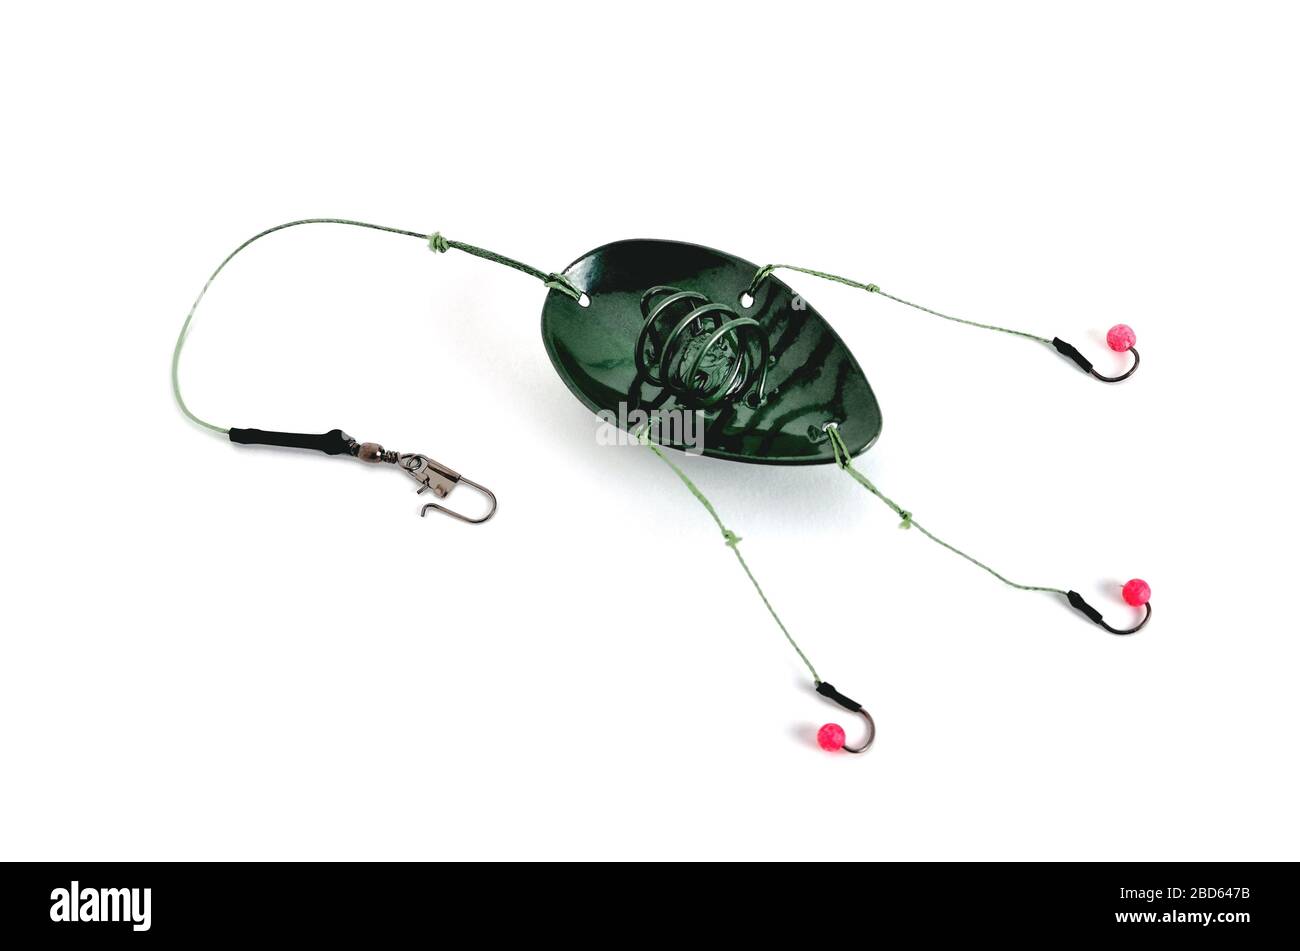 fishing trough spoon, fishing hooks and fishing line, accessories for  bottom fishing on a white background close-up Stock Photo - Alamy